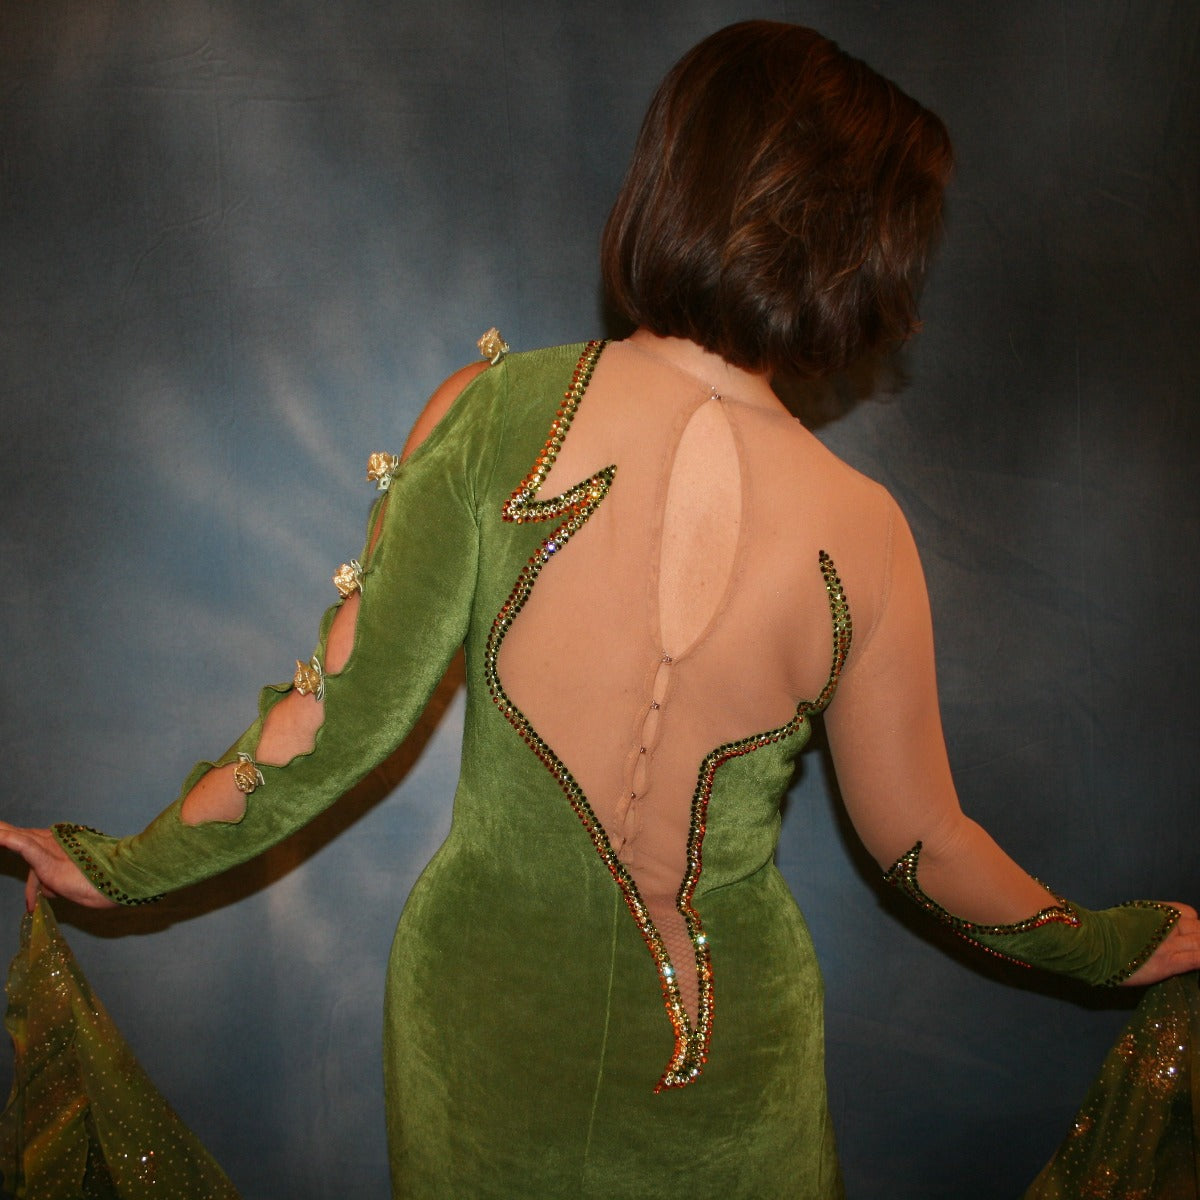 Crystal's Creations close up back view of Green ballroom dress created of luxurious olive green solid slinky on nude illusion base with glitter chiffon print flounces of olive greens & gold… embellished with olivine, jonquil & peach Swarovski rhinestones.